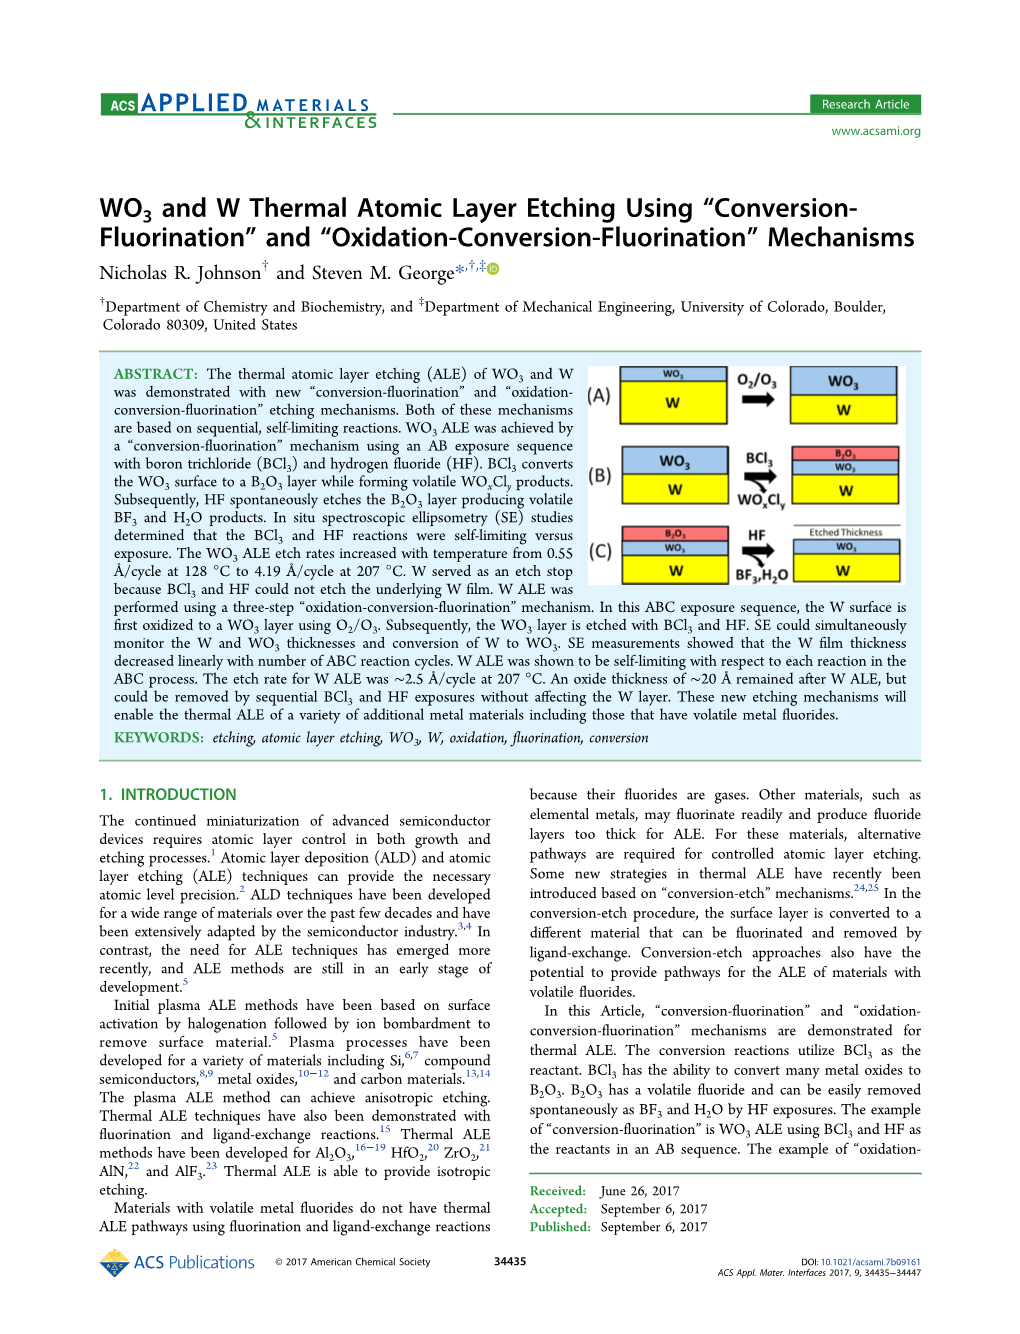 WO3 and W Thermal Atomic Layer Etching Using Conversion- Fluorination” and “Oxidation-Conversion-Fluorination” Mechanisms † † ‡ Nicholas R